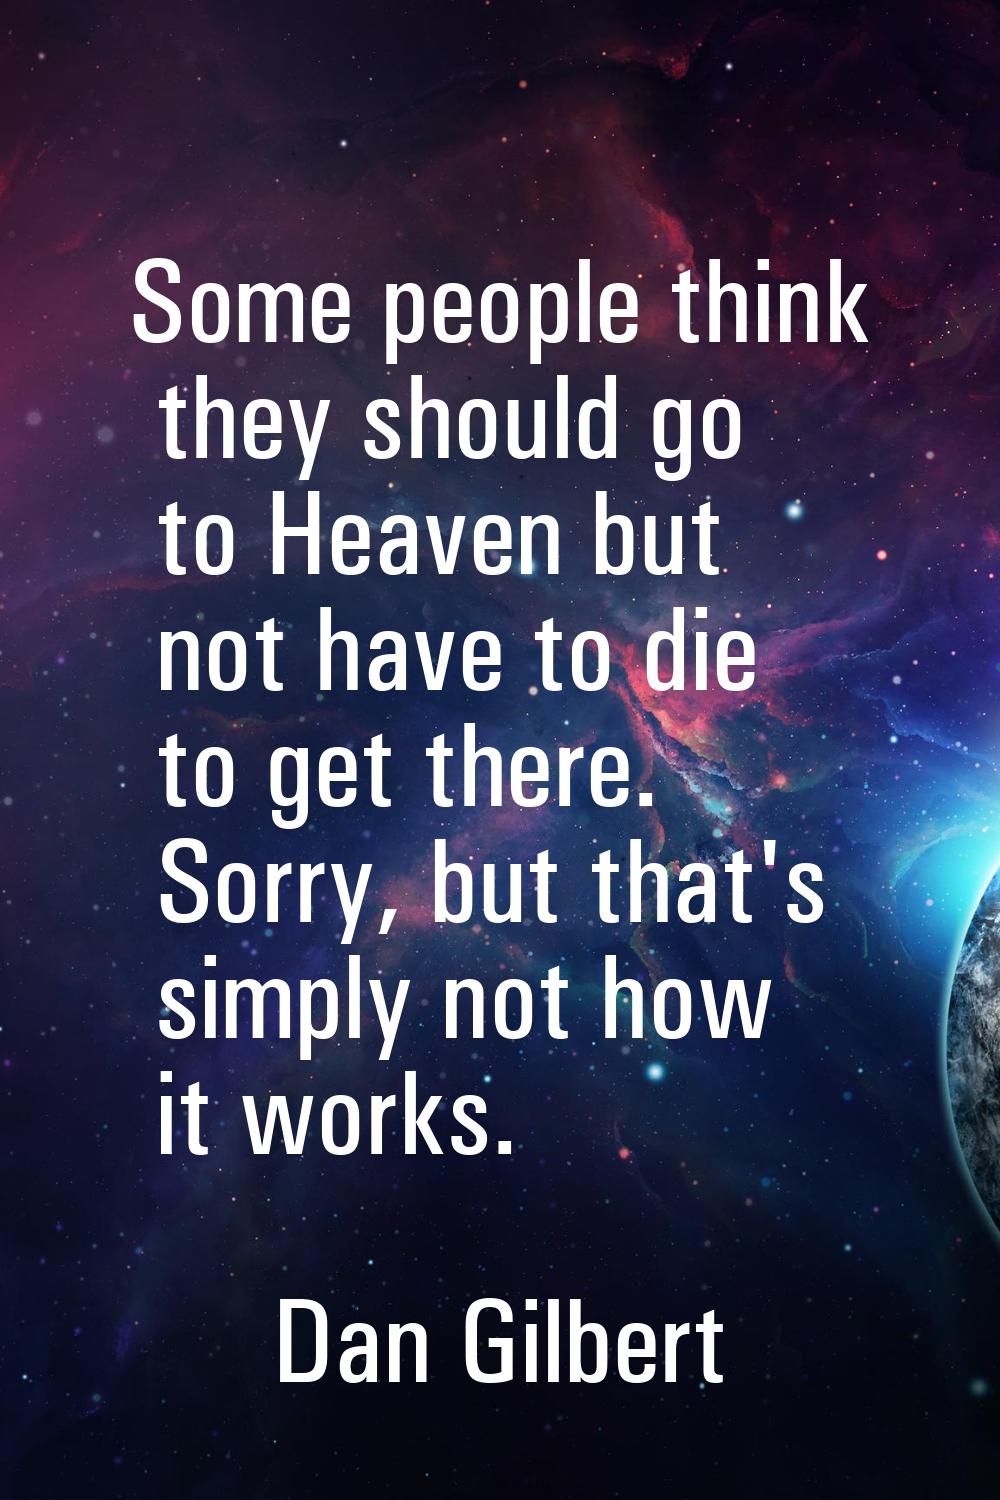 Some people think they should go to Heaven but not have to die to get there. Sorry, but that's simp